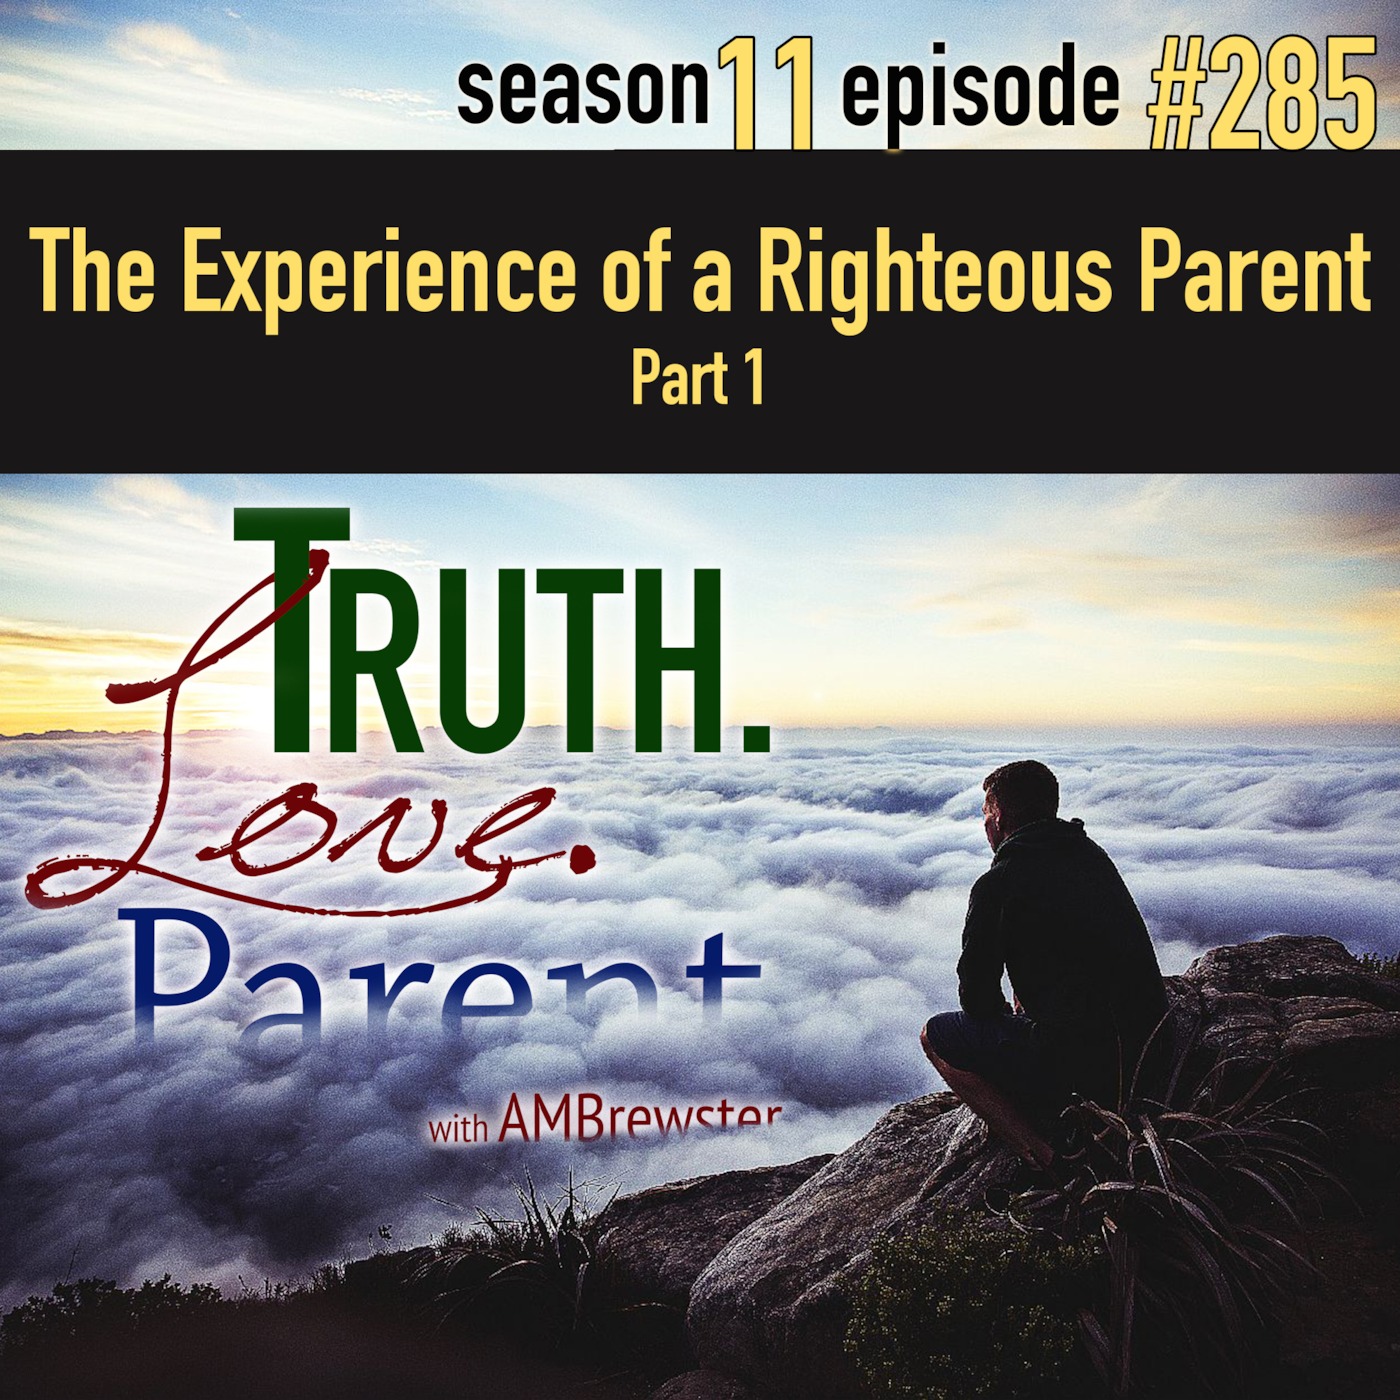 TLP 285: The Experience of a Righteous Parent, Part 1